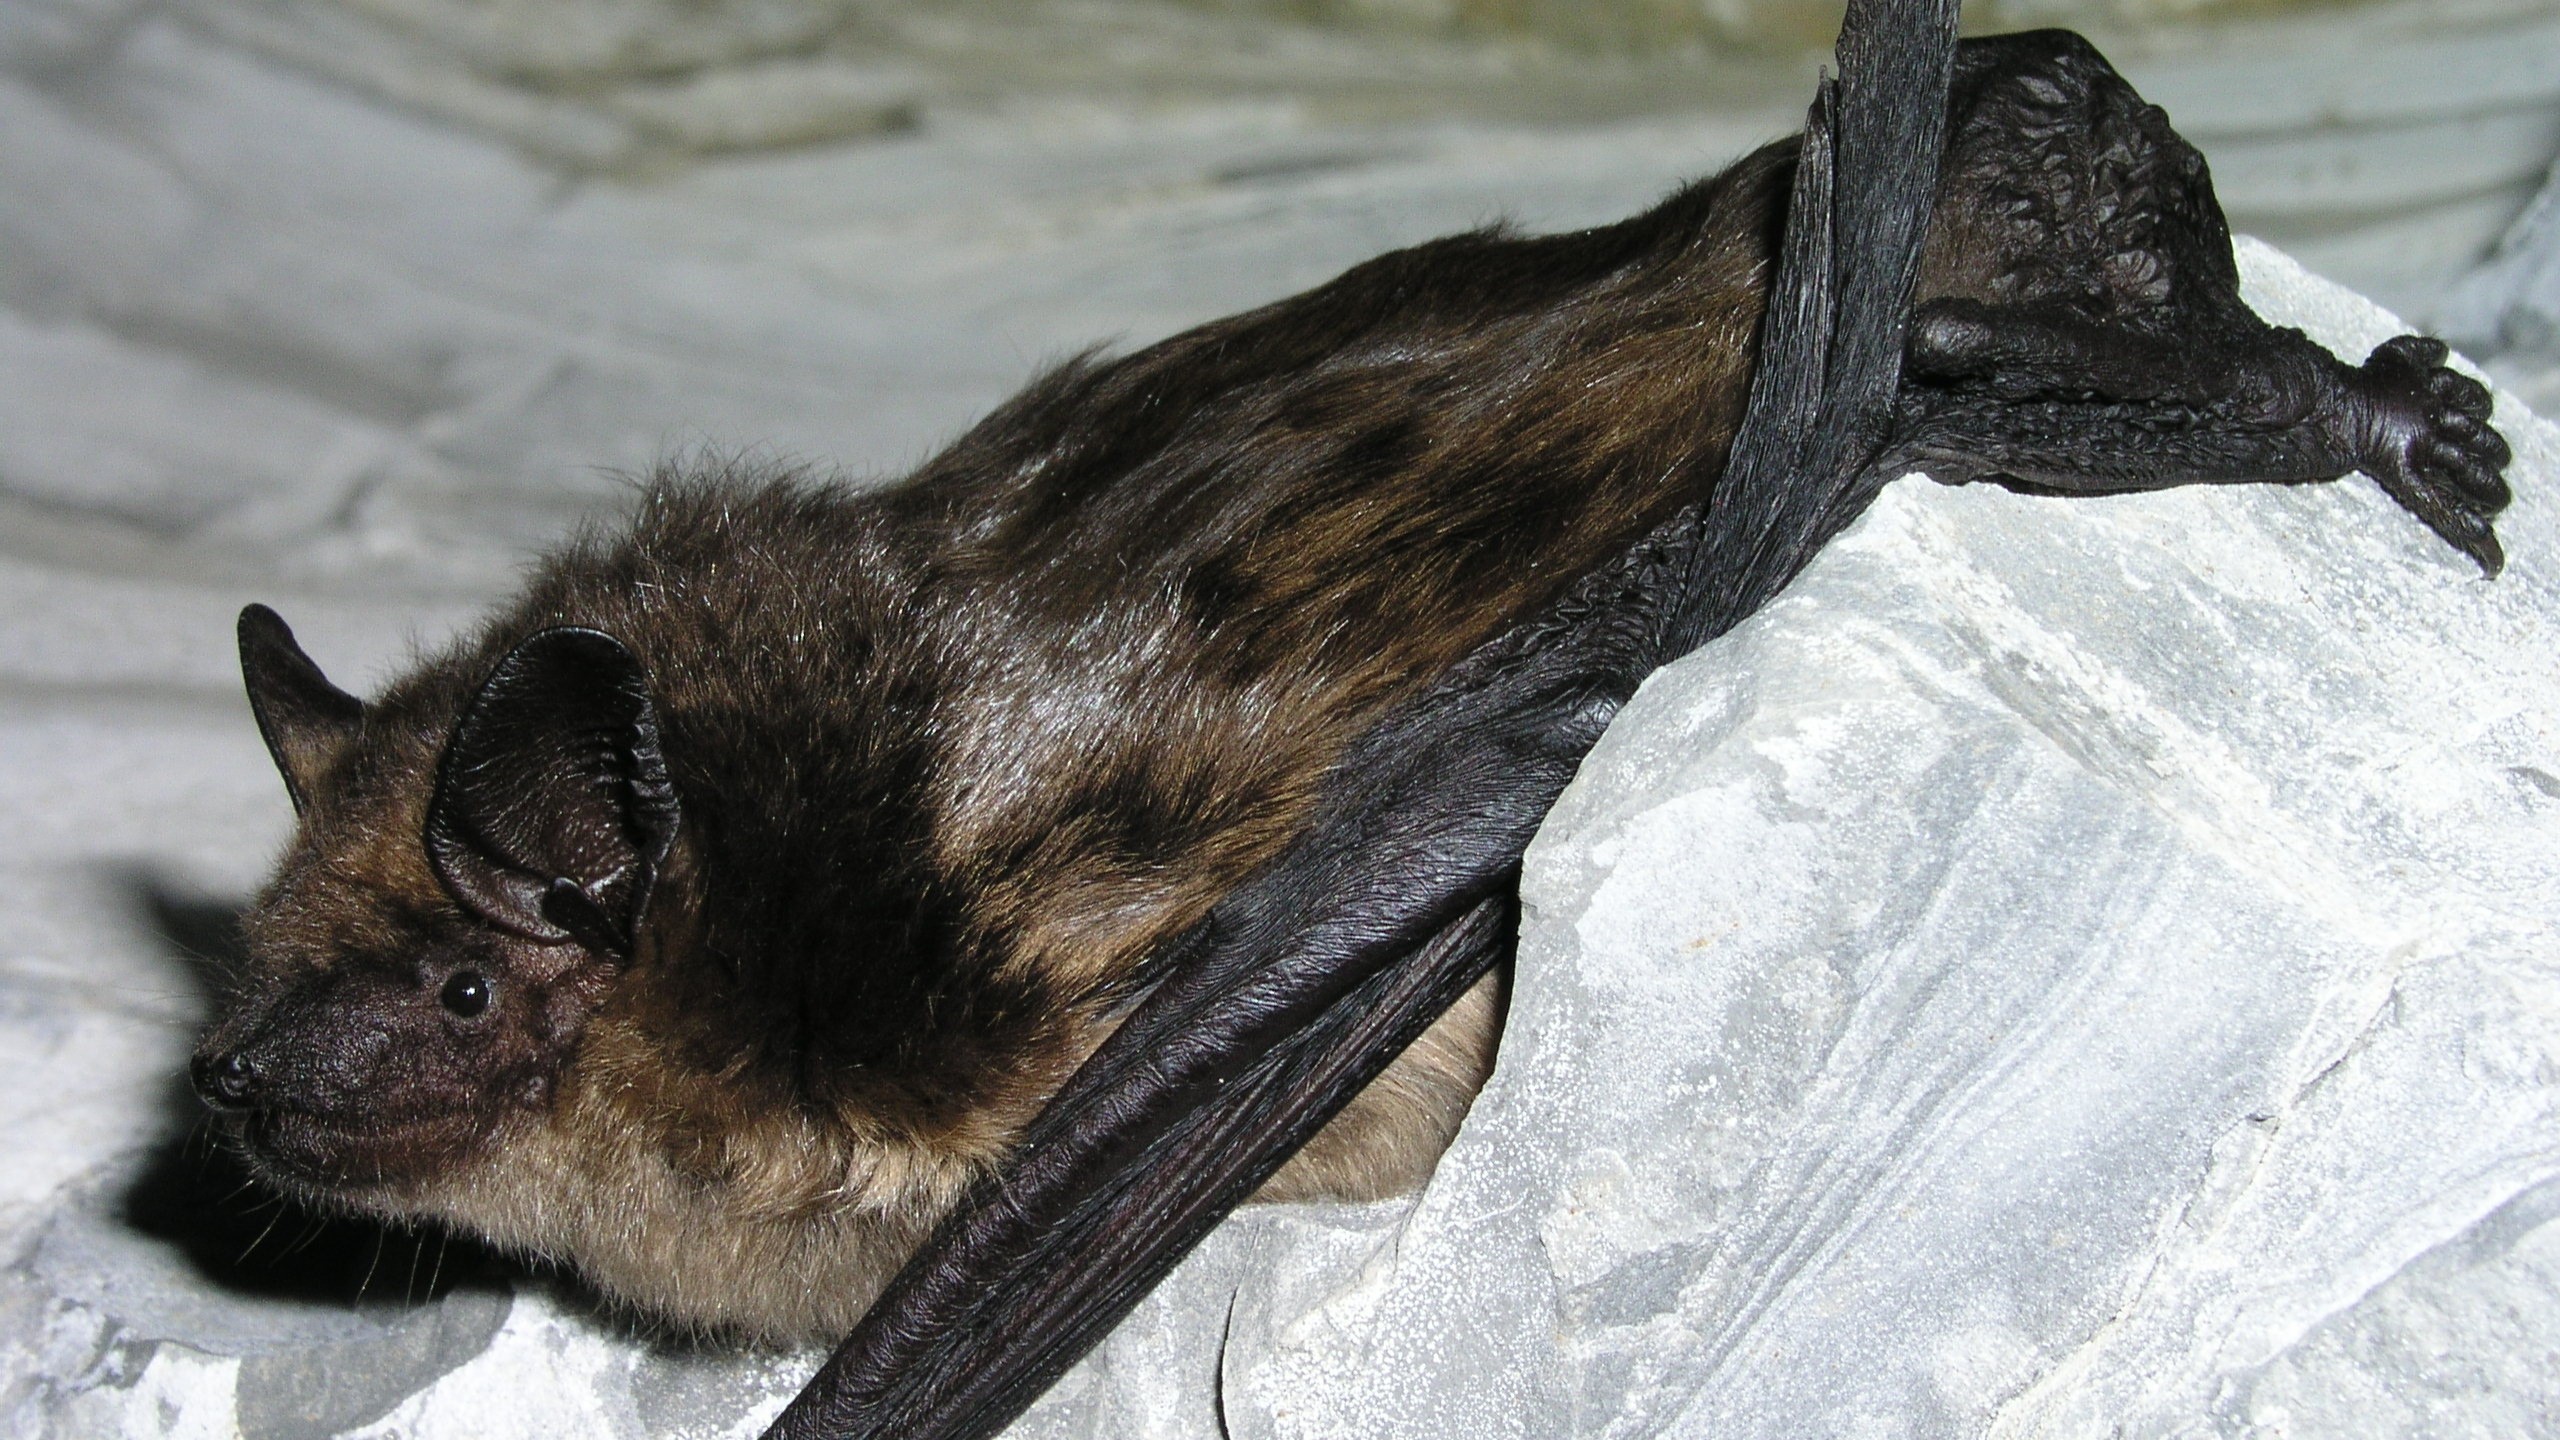 A serotine bat with brown and black fur clinging to rocks.